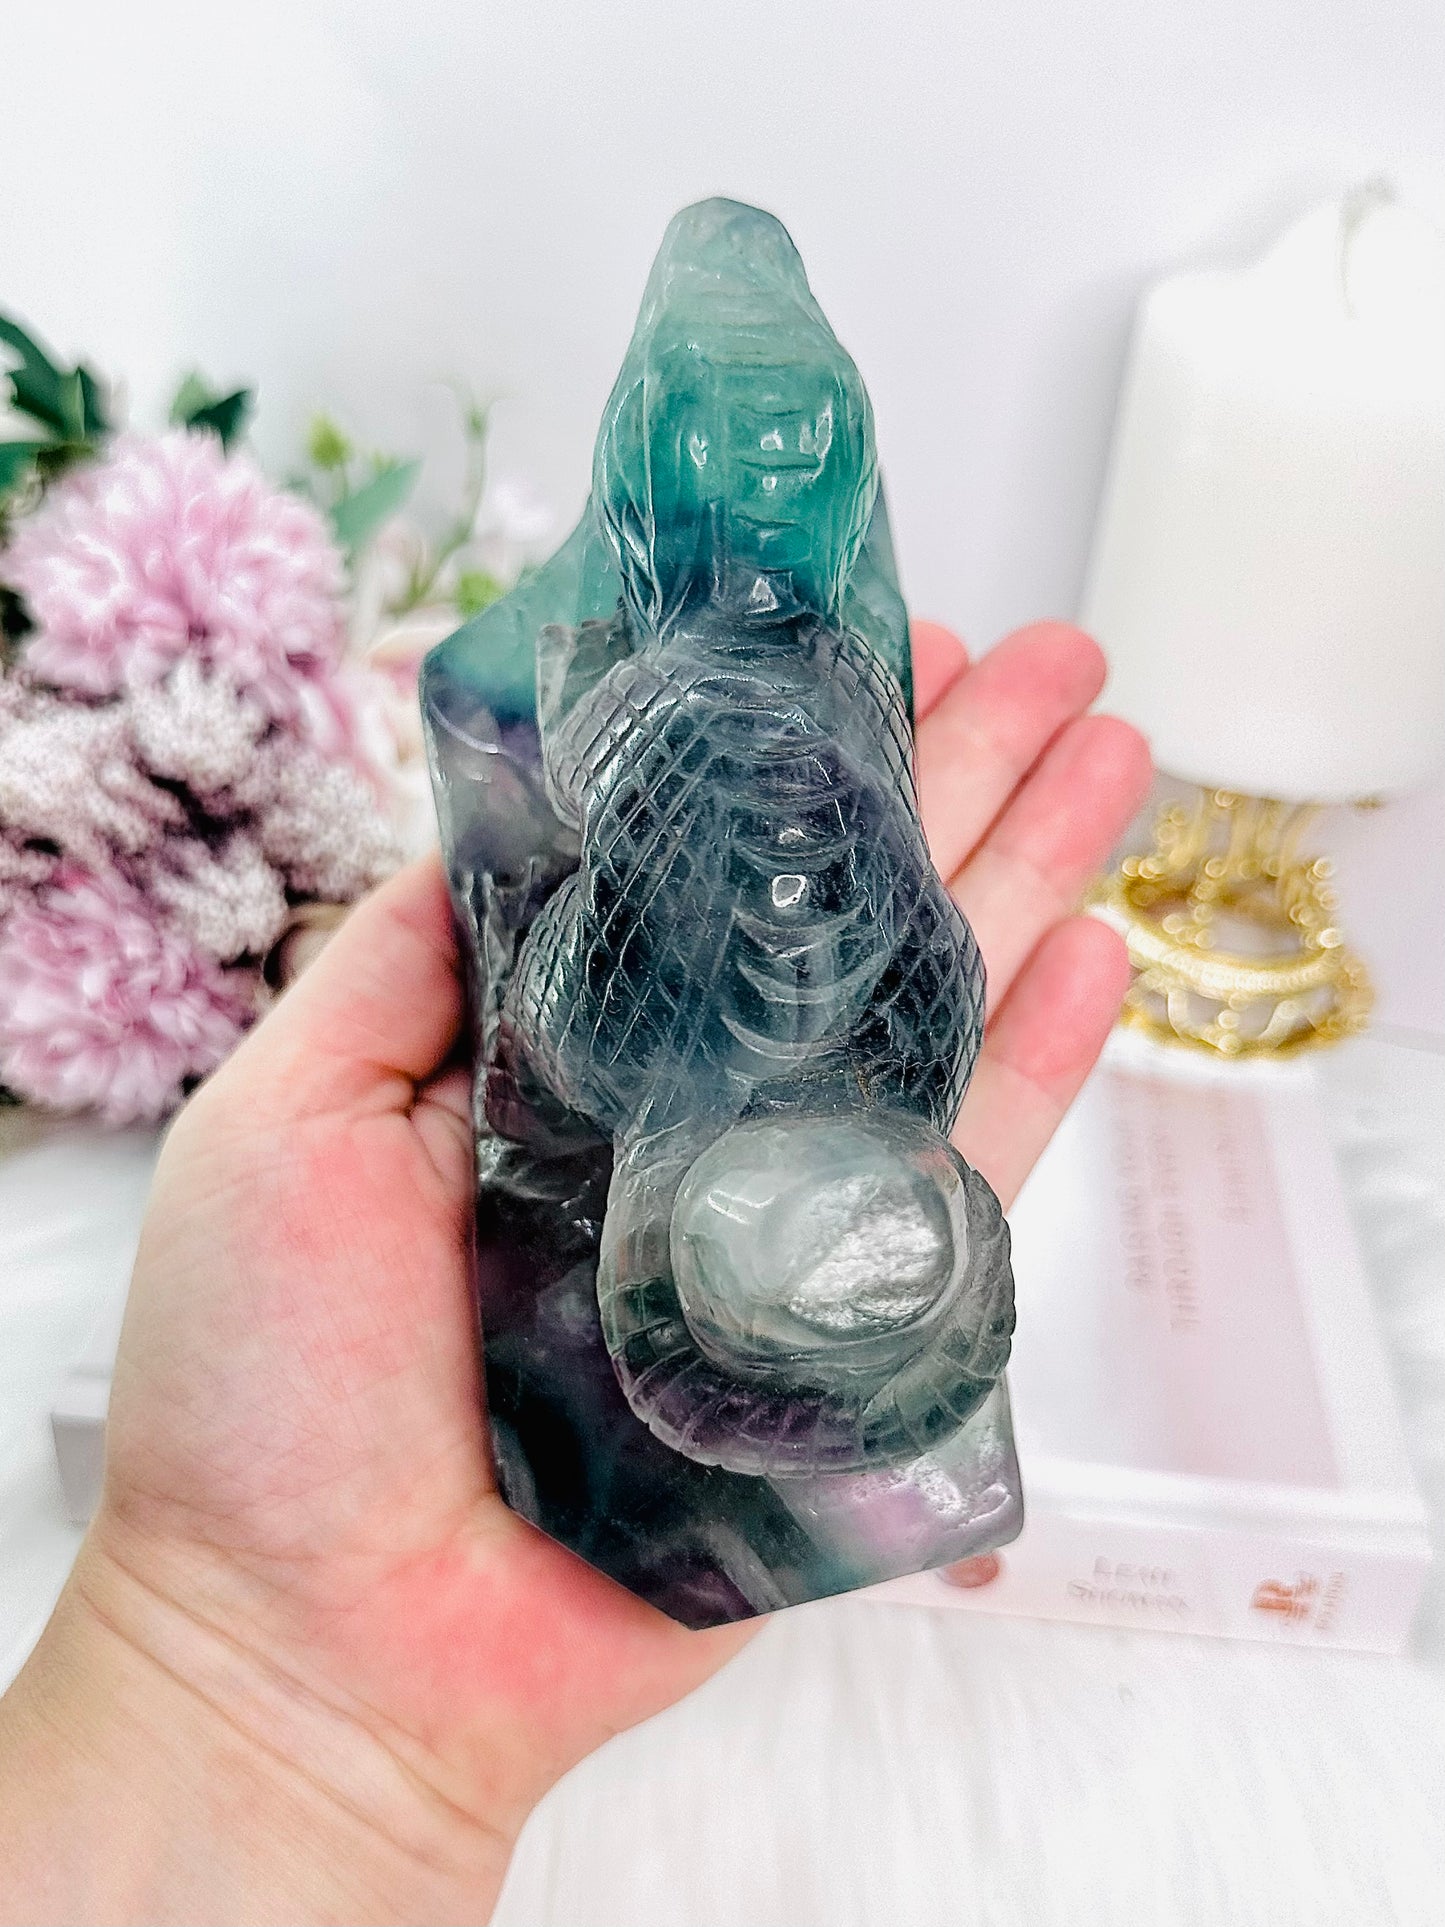 Absolutely Incredible Large 1.05KG Fabulous Fluorite Dinosaur Hand Carving